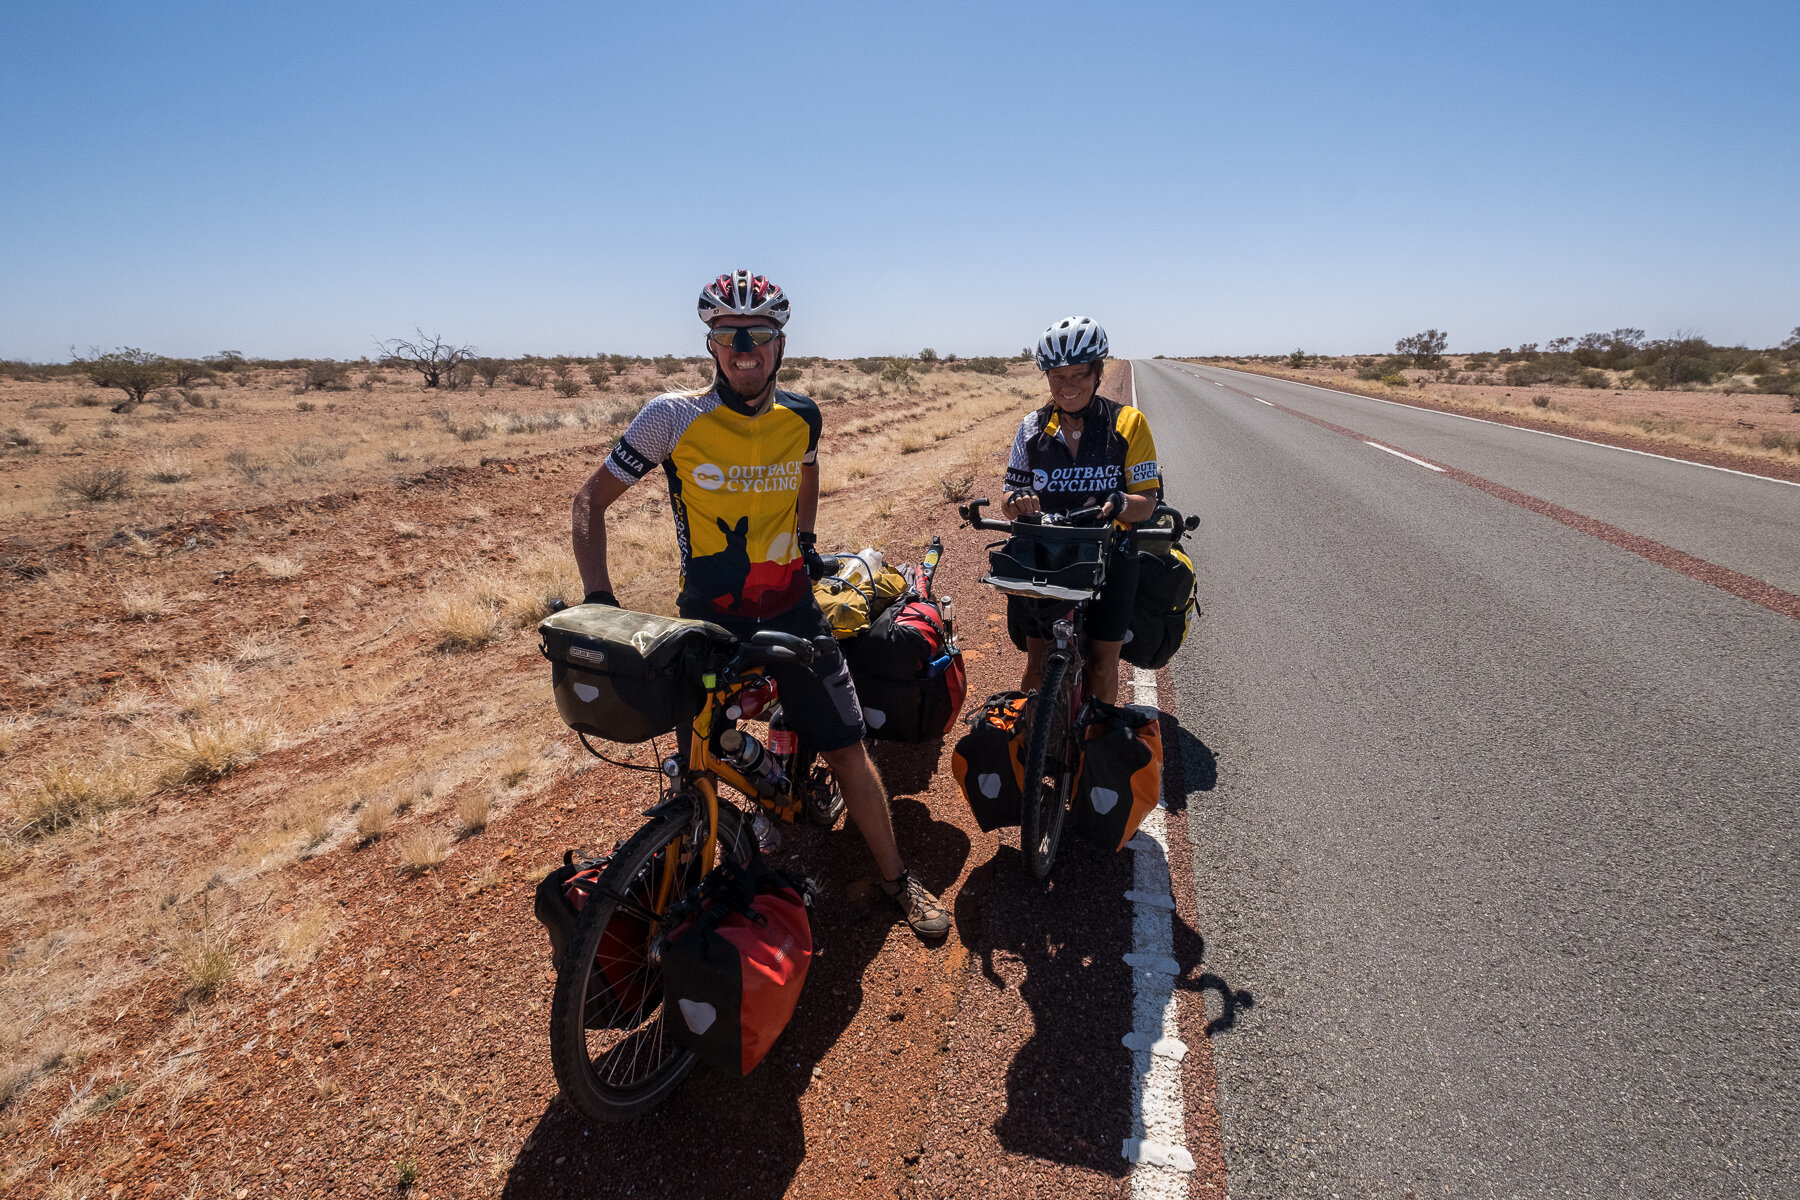  It's always interesting to meet new people, especially when you least expect it. I had the chance to meet some German cyclists who were riding towards Adelaide. We had a great chat and it was really interesting to learn about their journey. 